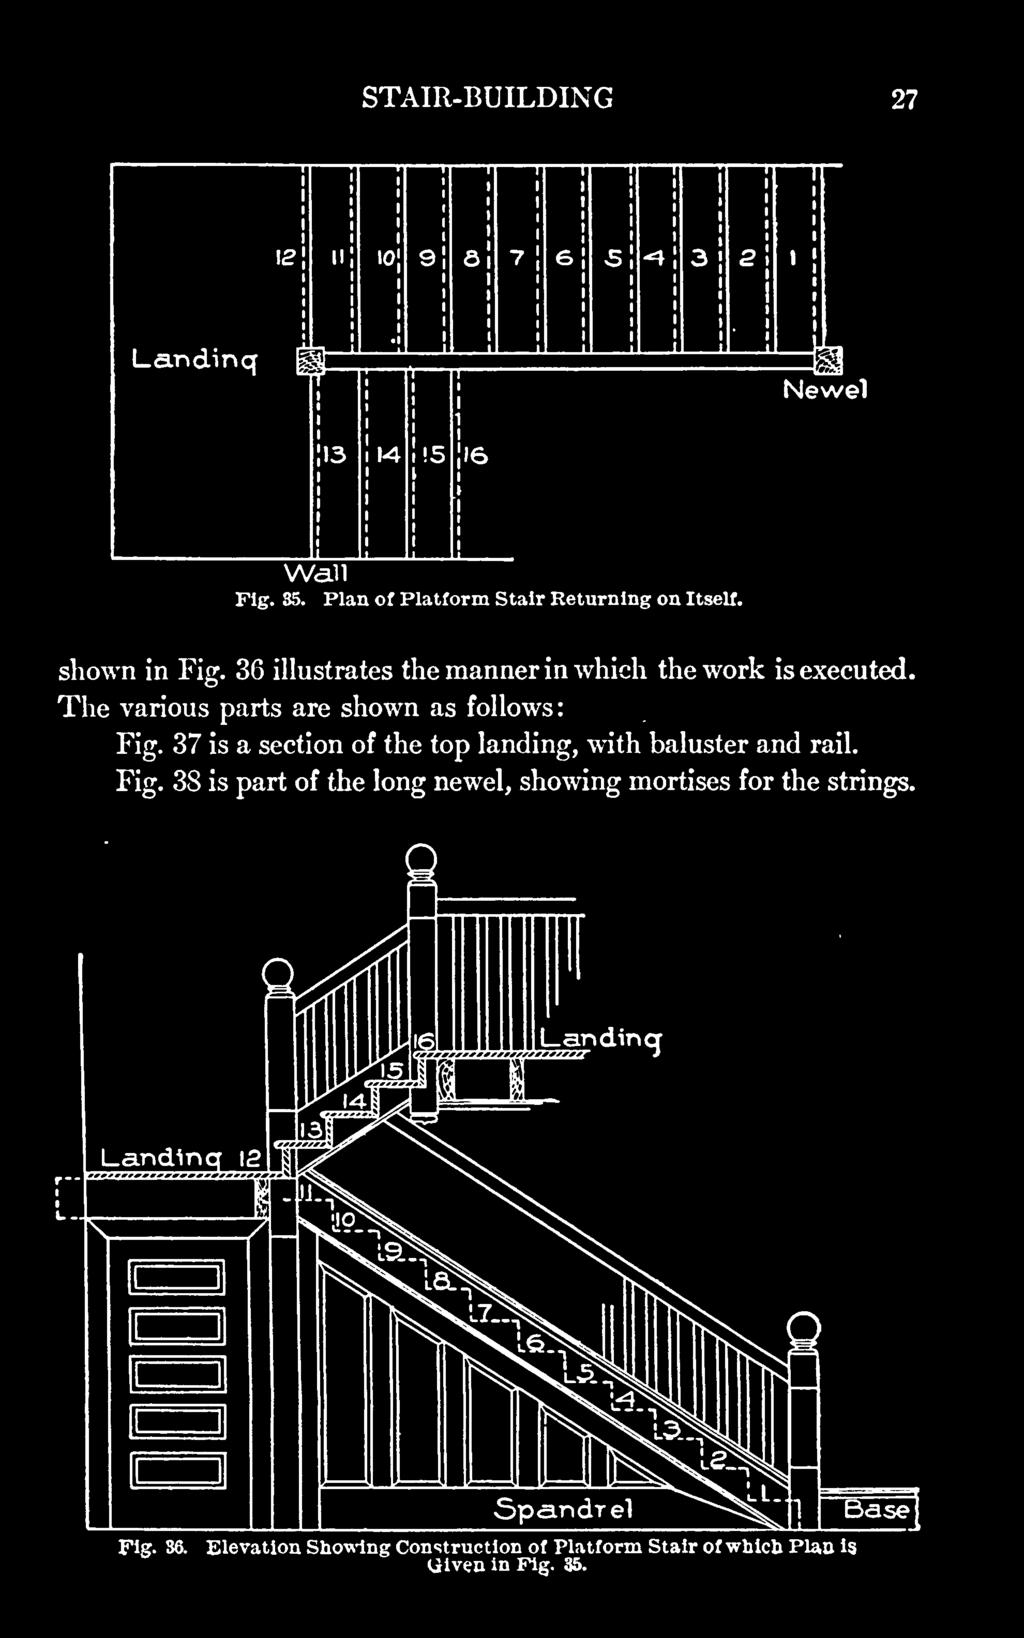 37 is a section of the top landing, with baluster and rail. Fig.